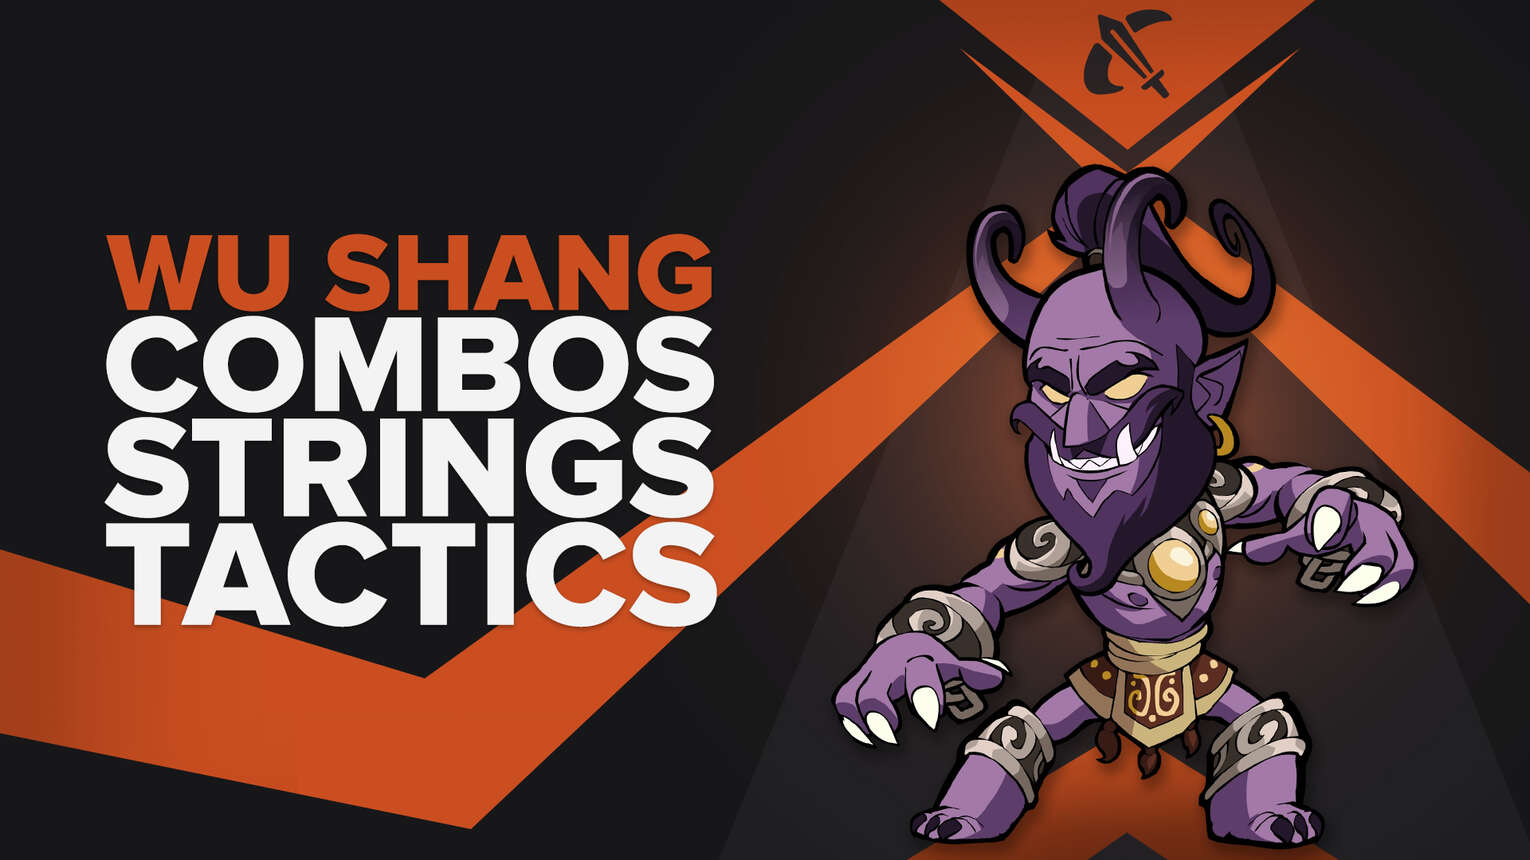 Best Wu Shang combos, strings, and combat tactics in Brawlhalla